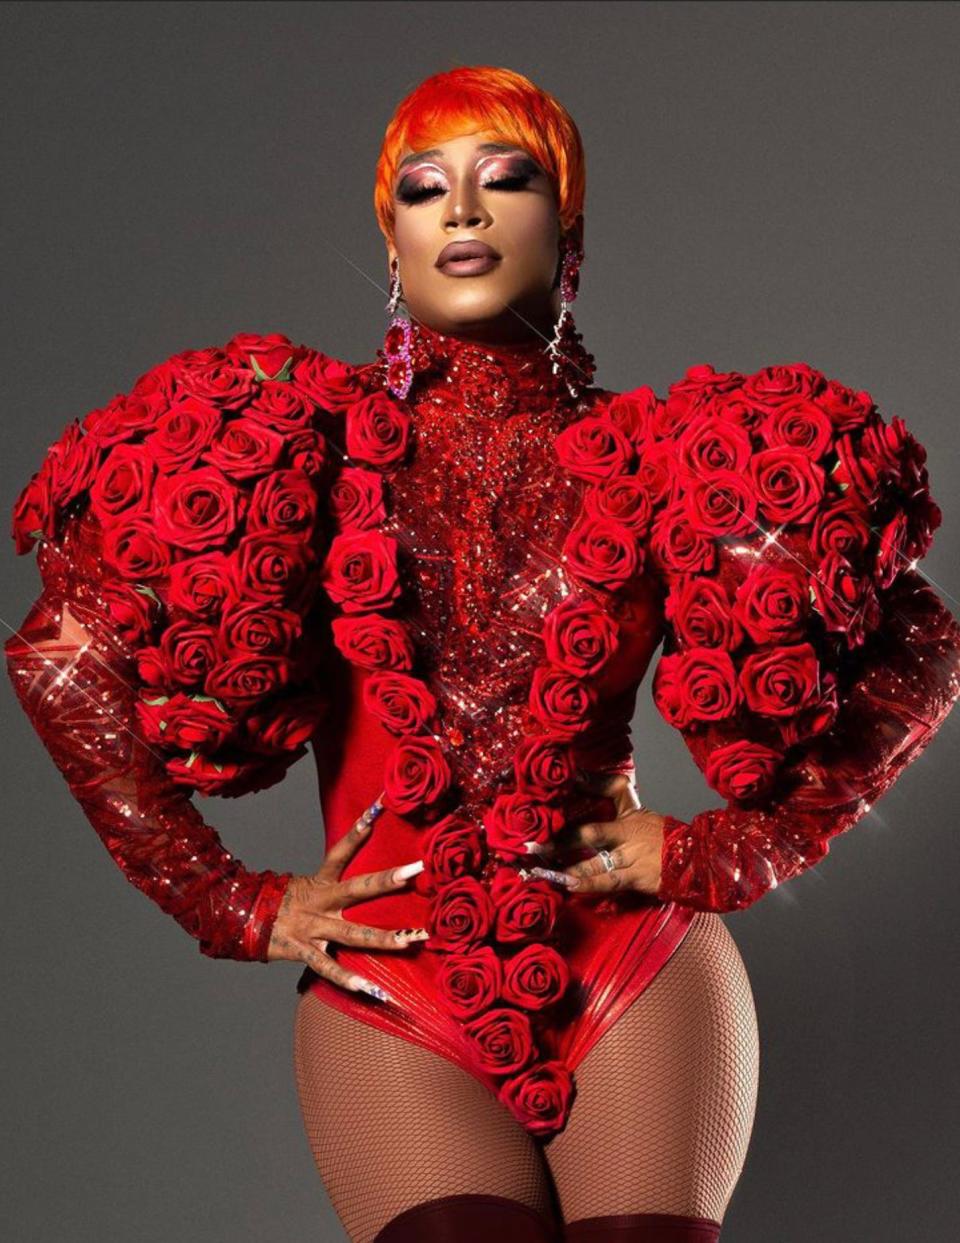 Kardi Redd Diamond of Canton will be among the drag performers on Saturday night at The Auricle in downtown Canton. Also performing will be Orion Story, a contestant on the television show RuPaul's Drag Race.